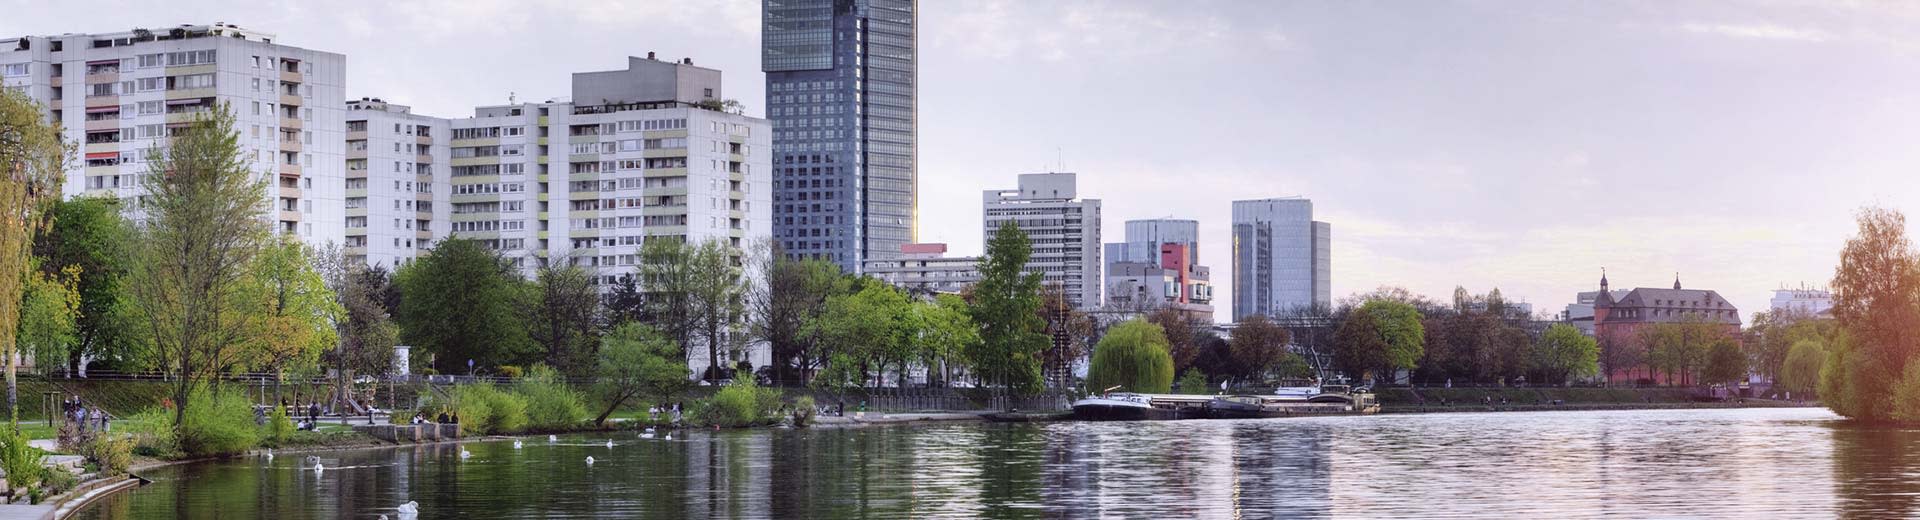 Along the waterfront, Offenbach's high-rise apartment buildings dominate the skyline.